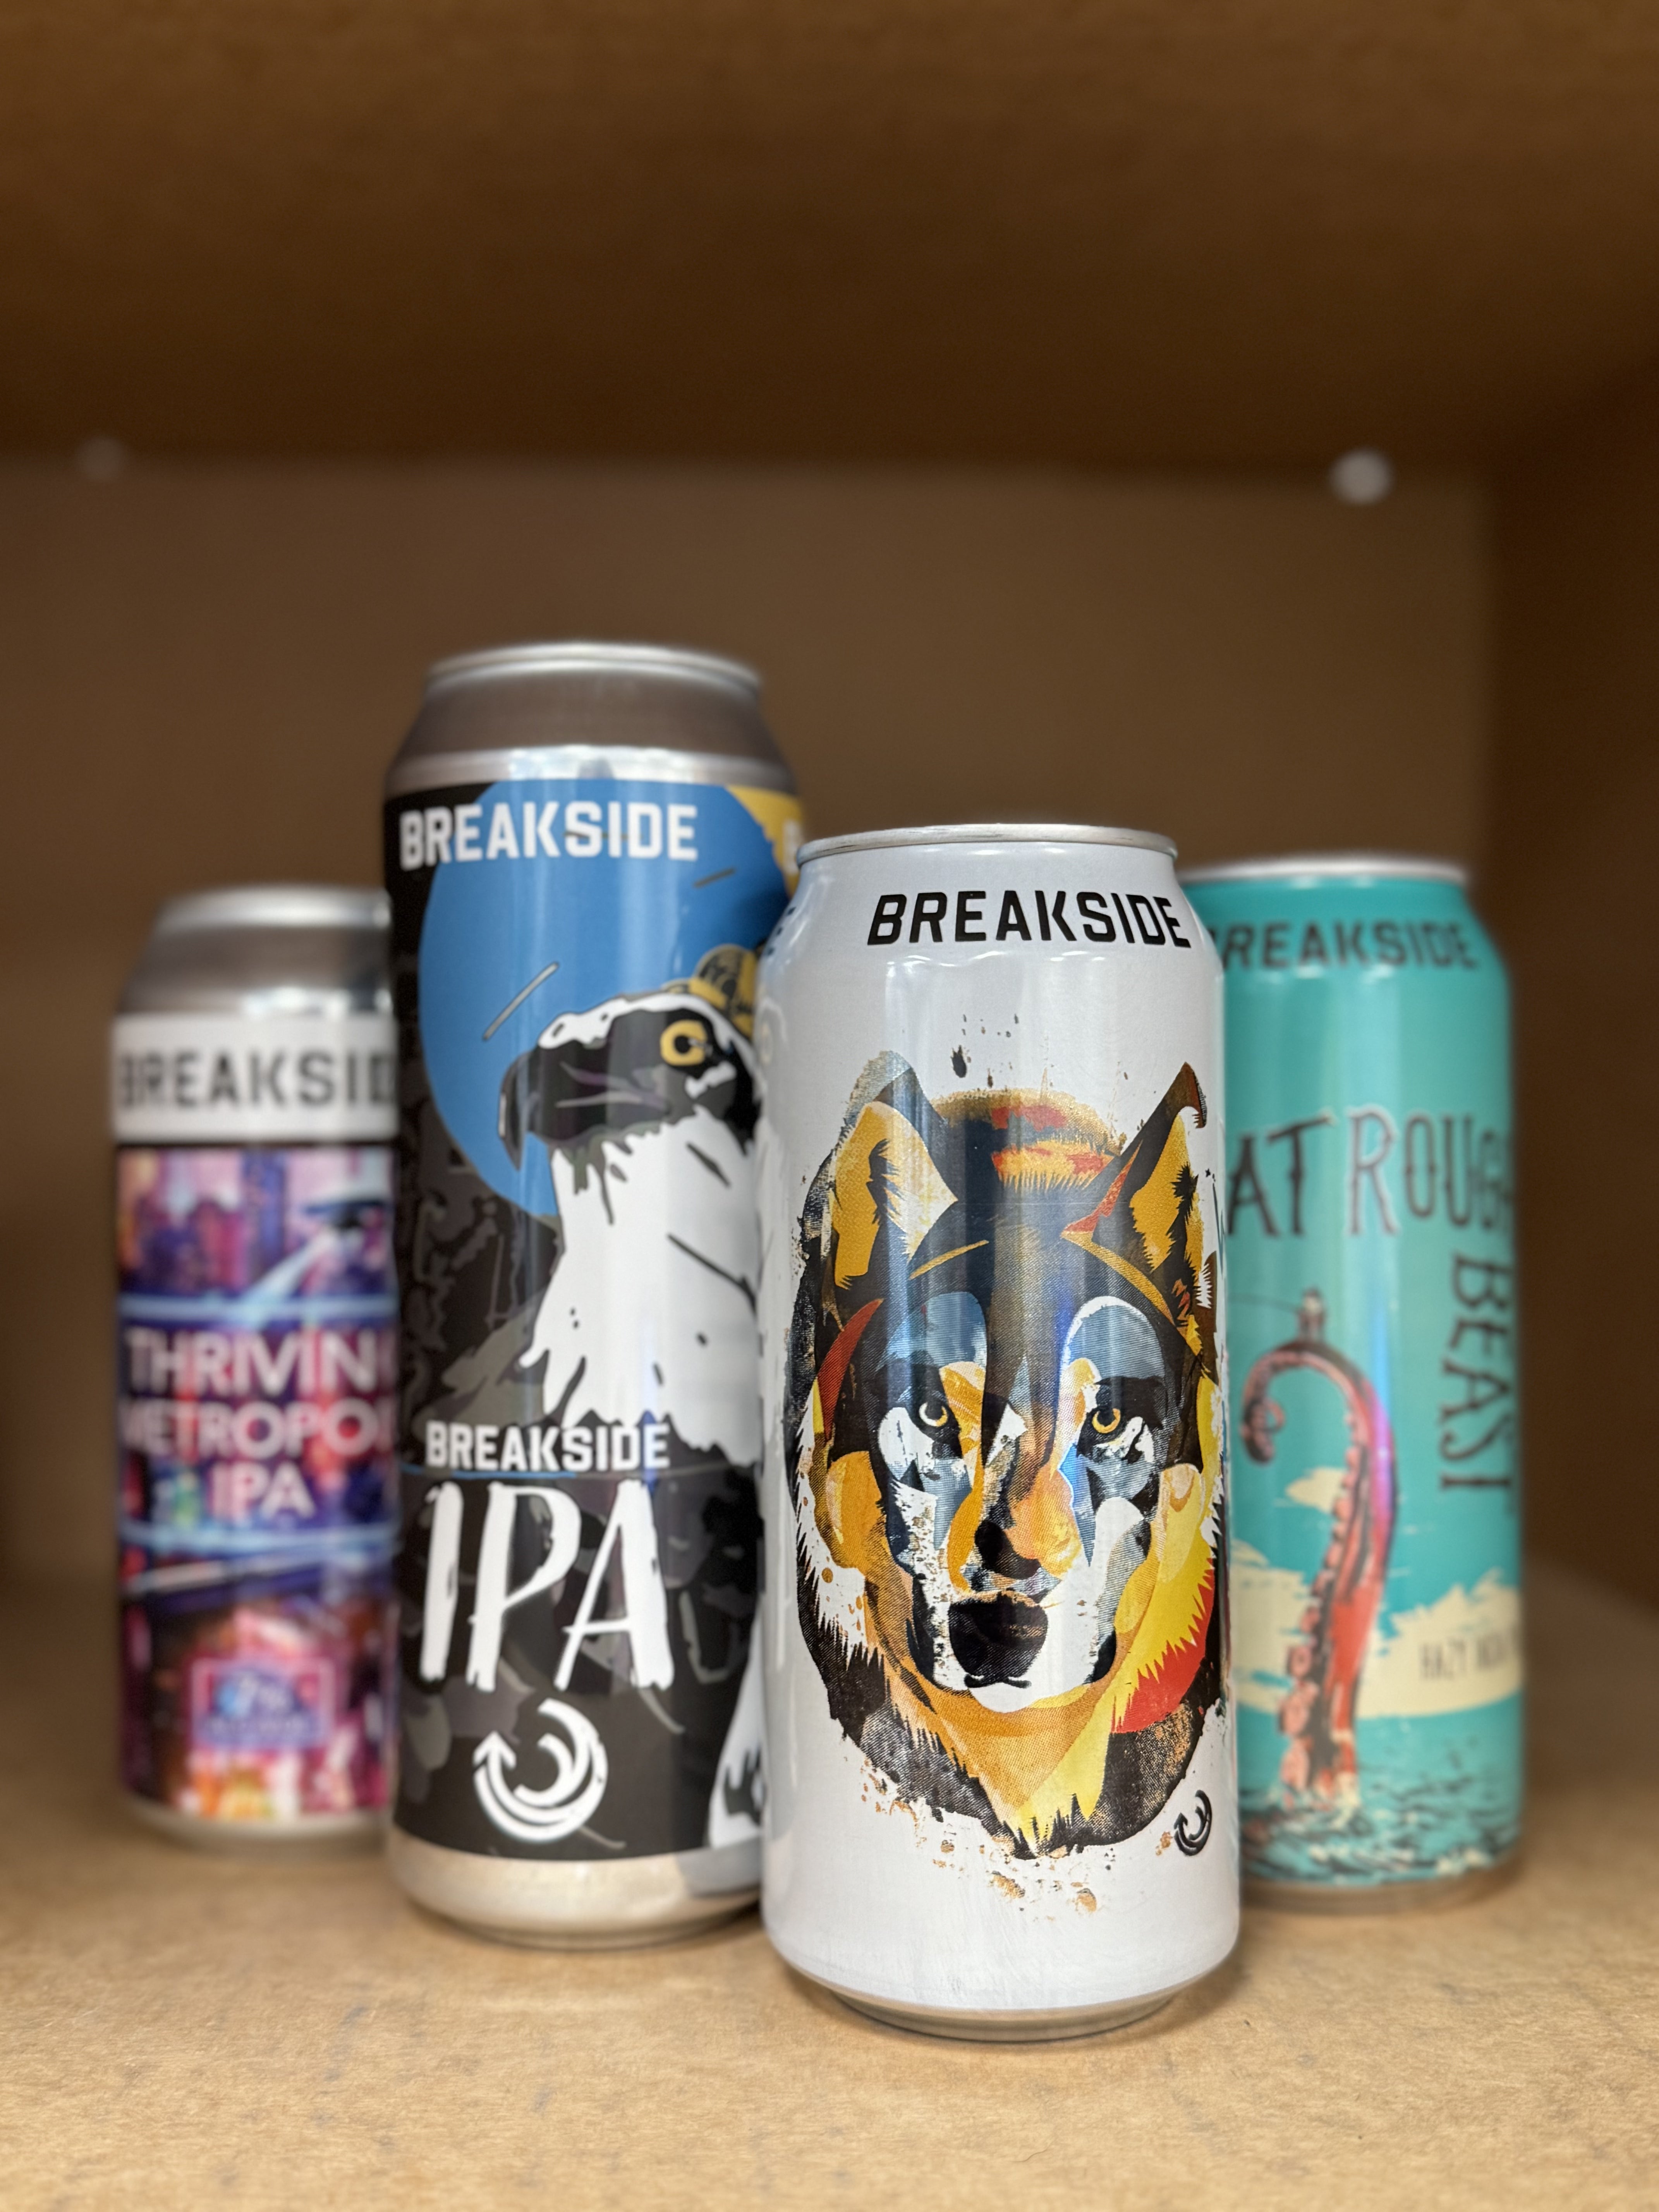 -Breakside- Breakside 🚀 Take Off Set 2-Packs & Cases- Only @ Beer Republic - The best online beer store for American & Canadian craft beer - Buy beer online from the USA and Canada - Bier online kopen - Amerikaans bier kopen - Craft beer store - Craft beer kopen - Amerikanisch bier kaufen - Bier online kaufen - Acheter biere online - IPA - Stout - Porter - New England IPA - Hazy IPA - Imperial Stout - Barrel Aged - Barrel Aged Imperial Stout - Brown - Dark beer - Blond - Blonde - Pilsner - Lager - Wheat - W